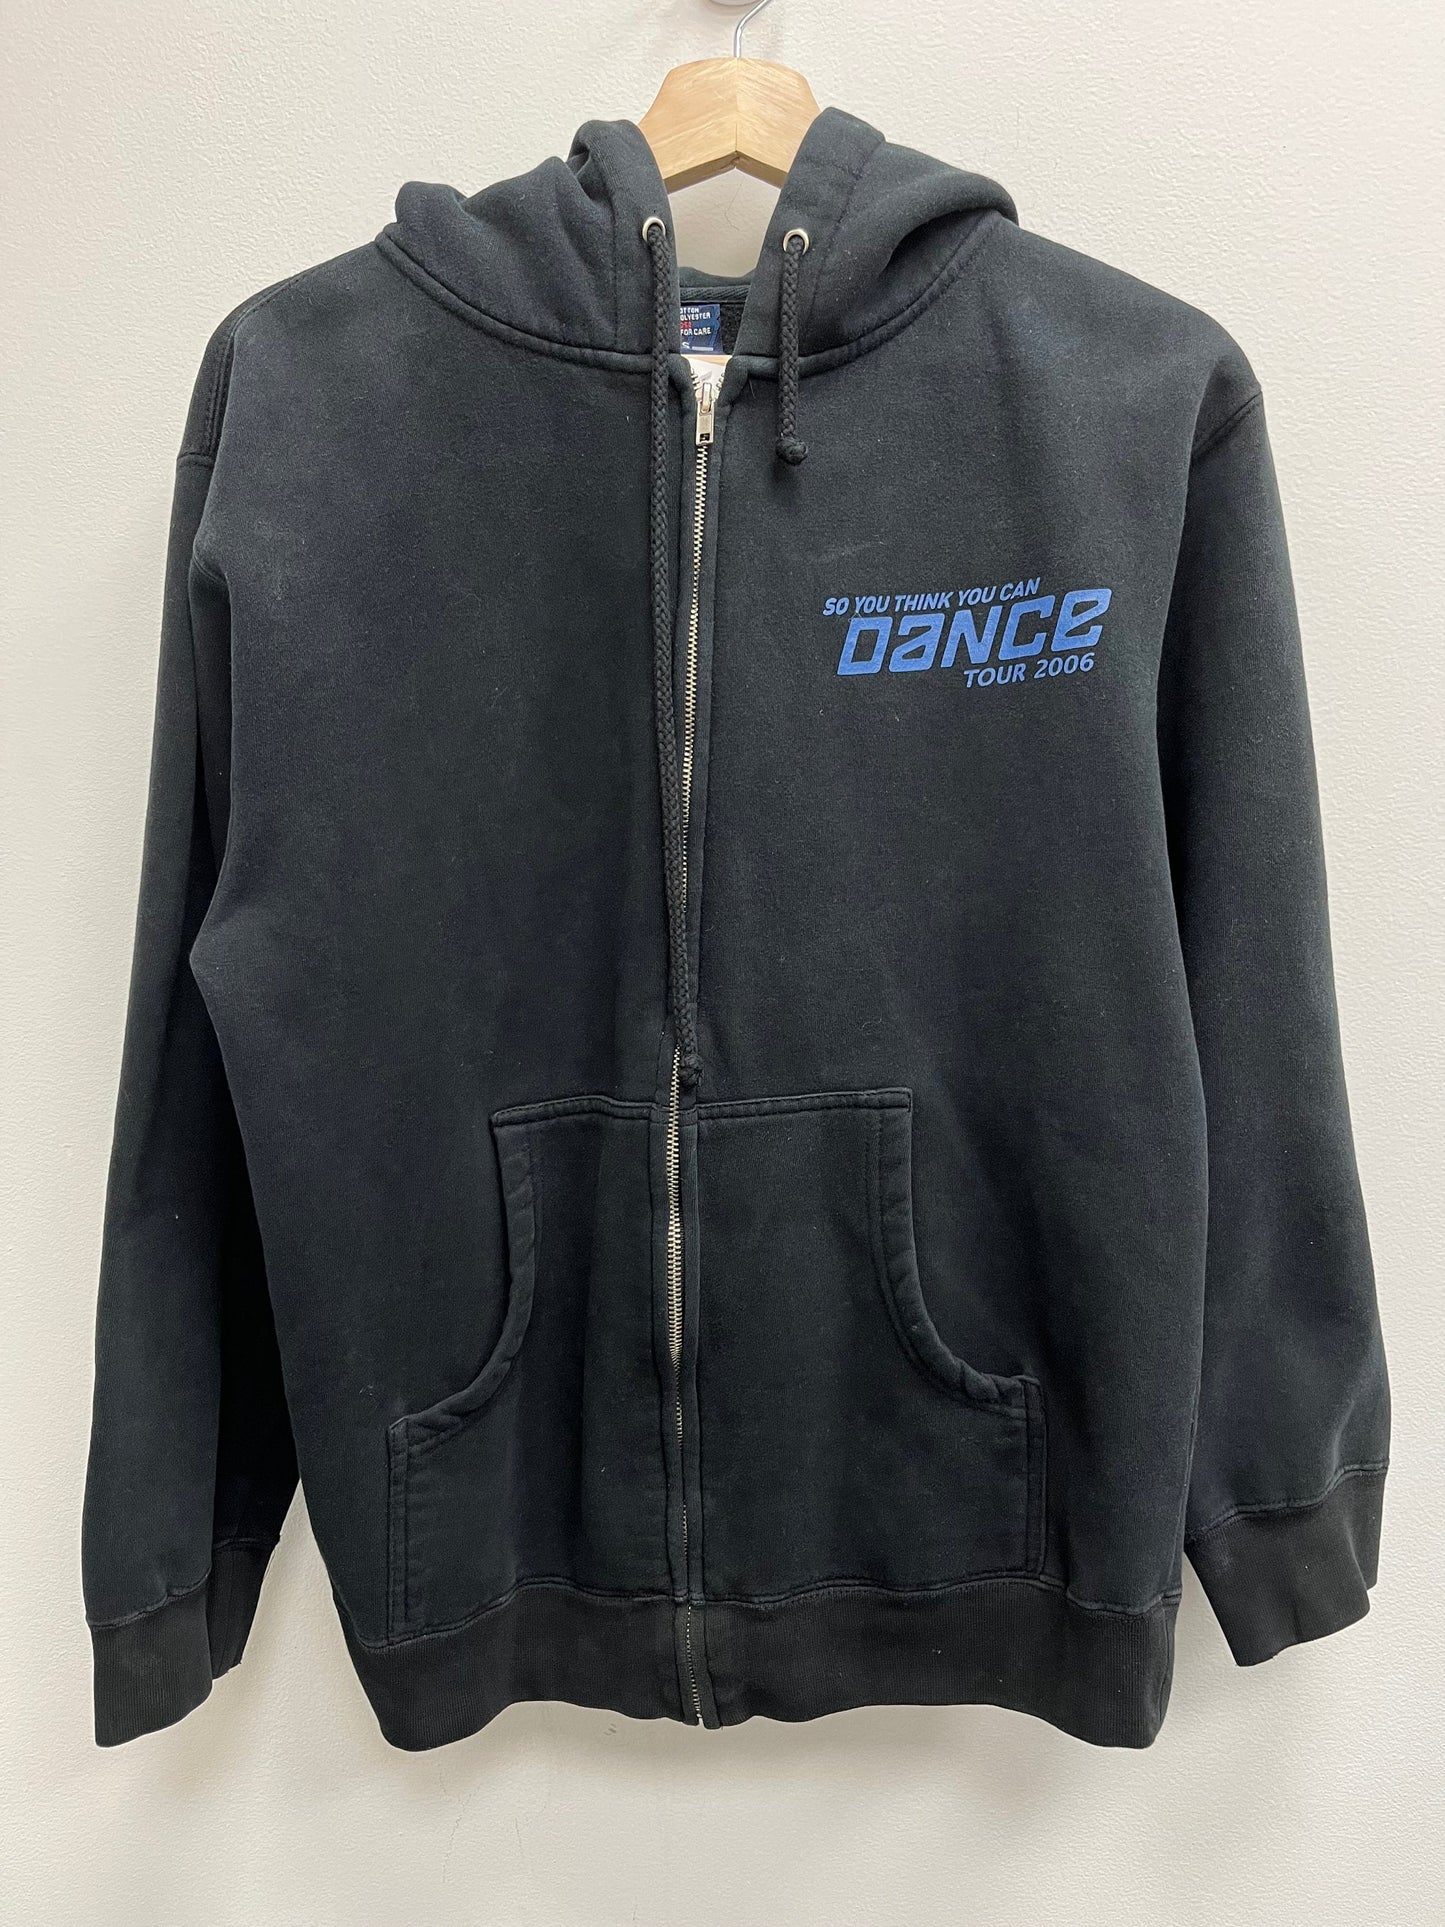 Vintage 2000’s So You Think You Can Dance Tour Hoodie